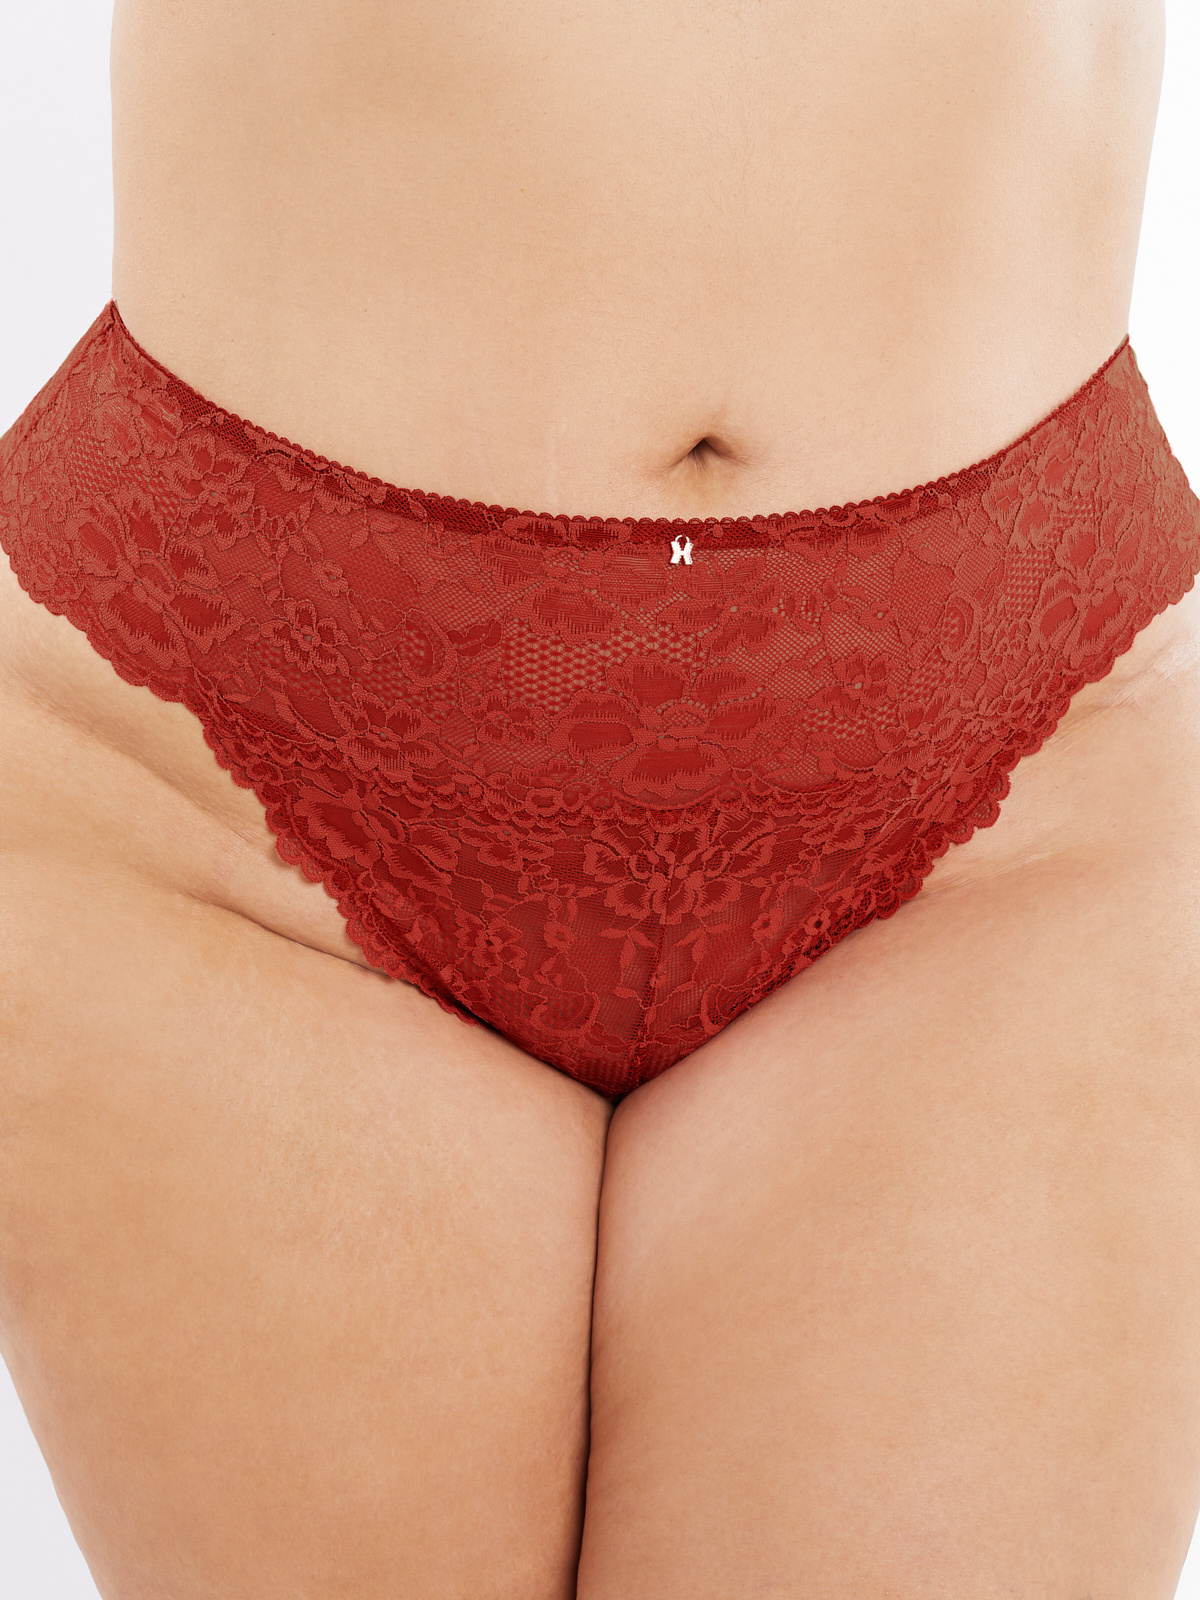 NEW Floral Lace High-Waist Thong in Red